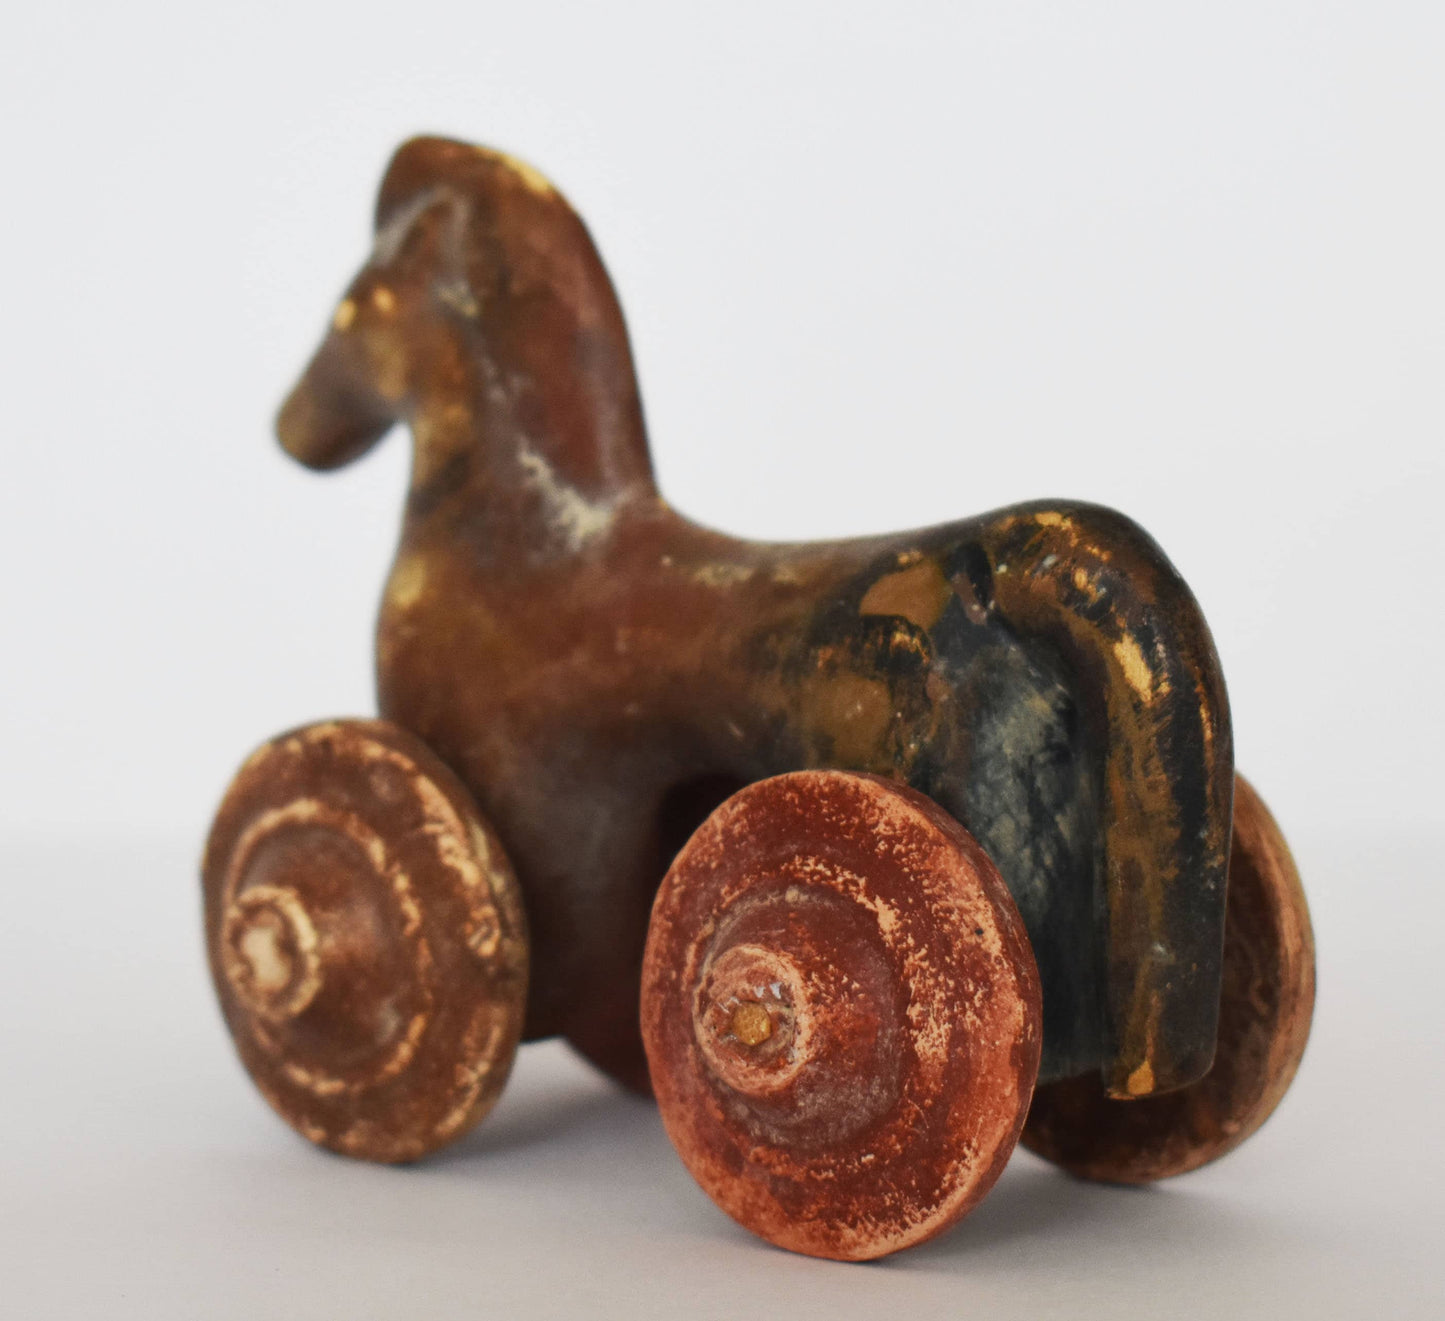 Horse on Wheels  - Children's Toy - Athens, Attica - 500 BC - Small - Museum Reproduction  - Ceramic Artifact